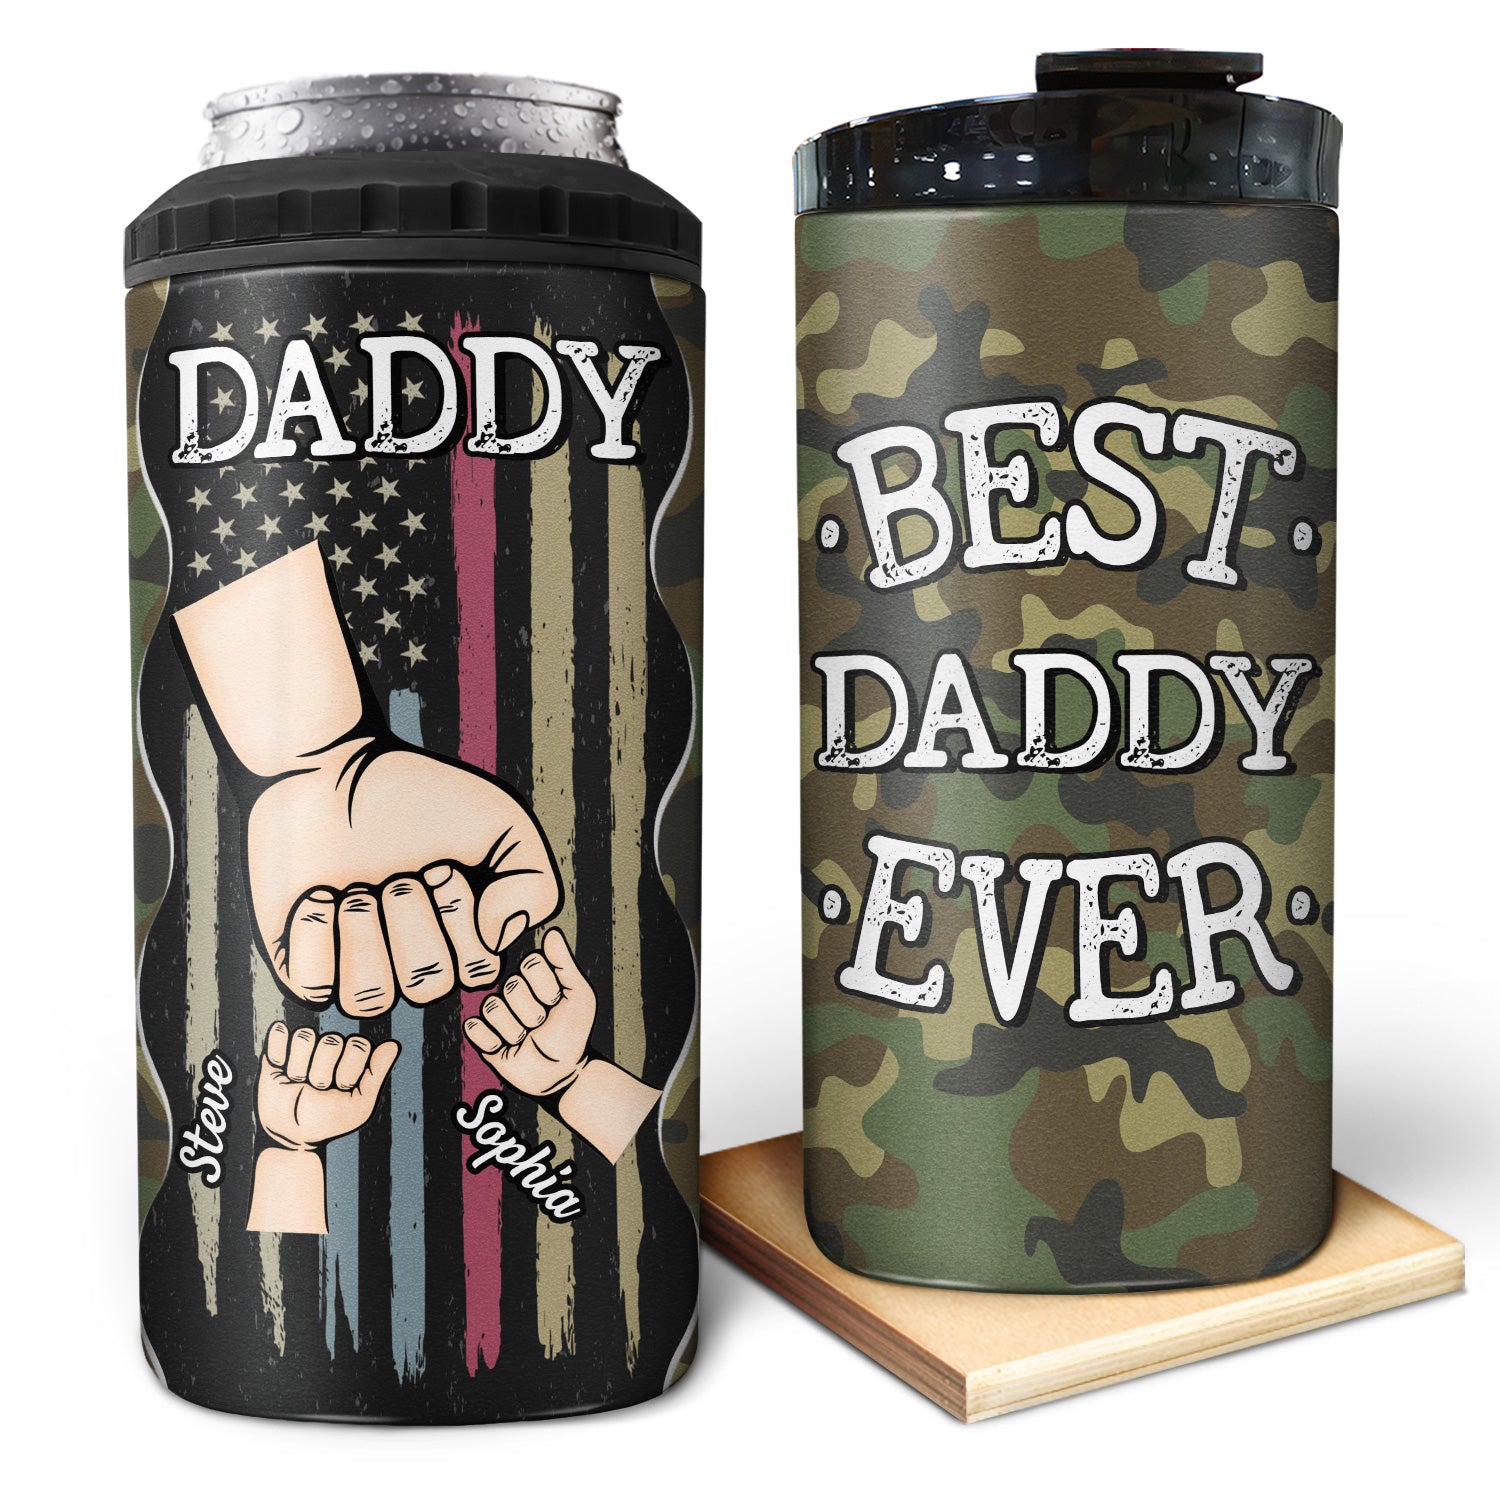 Best Daddy Ever Fist Bump - Birthday, Loving Gift For Dad, Father, Grandfather, Grandpa, Daughters, Sons, Grandkids - Personalized Custom 4 In 1 Can Cooler Tumbler